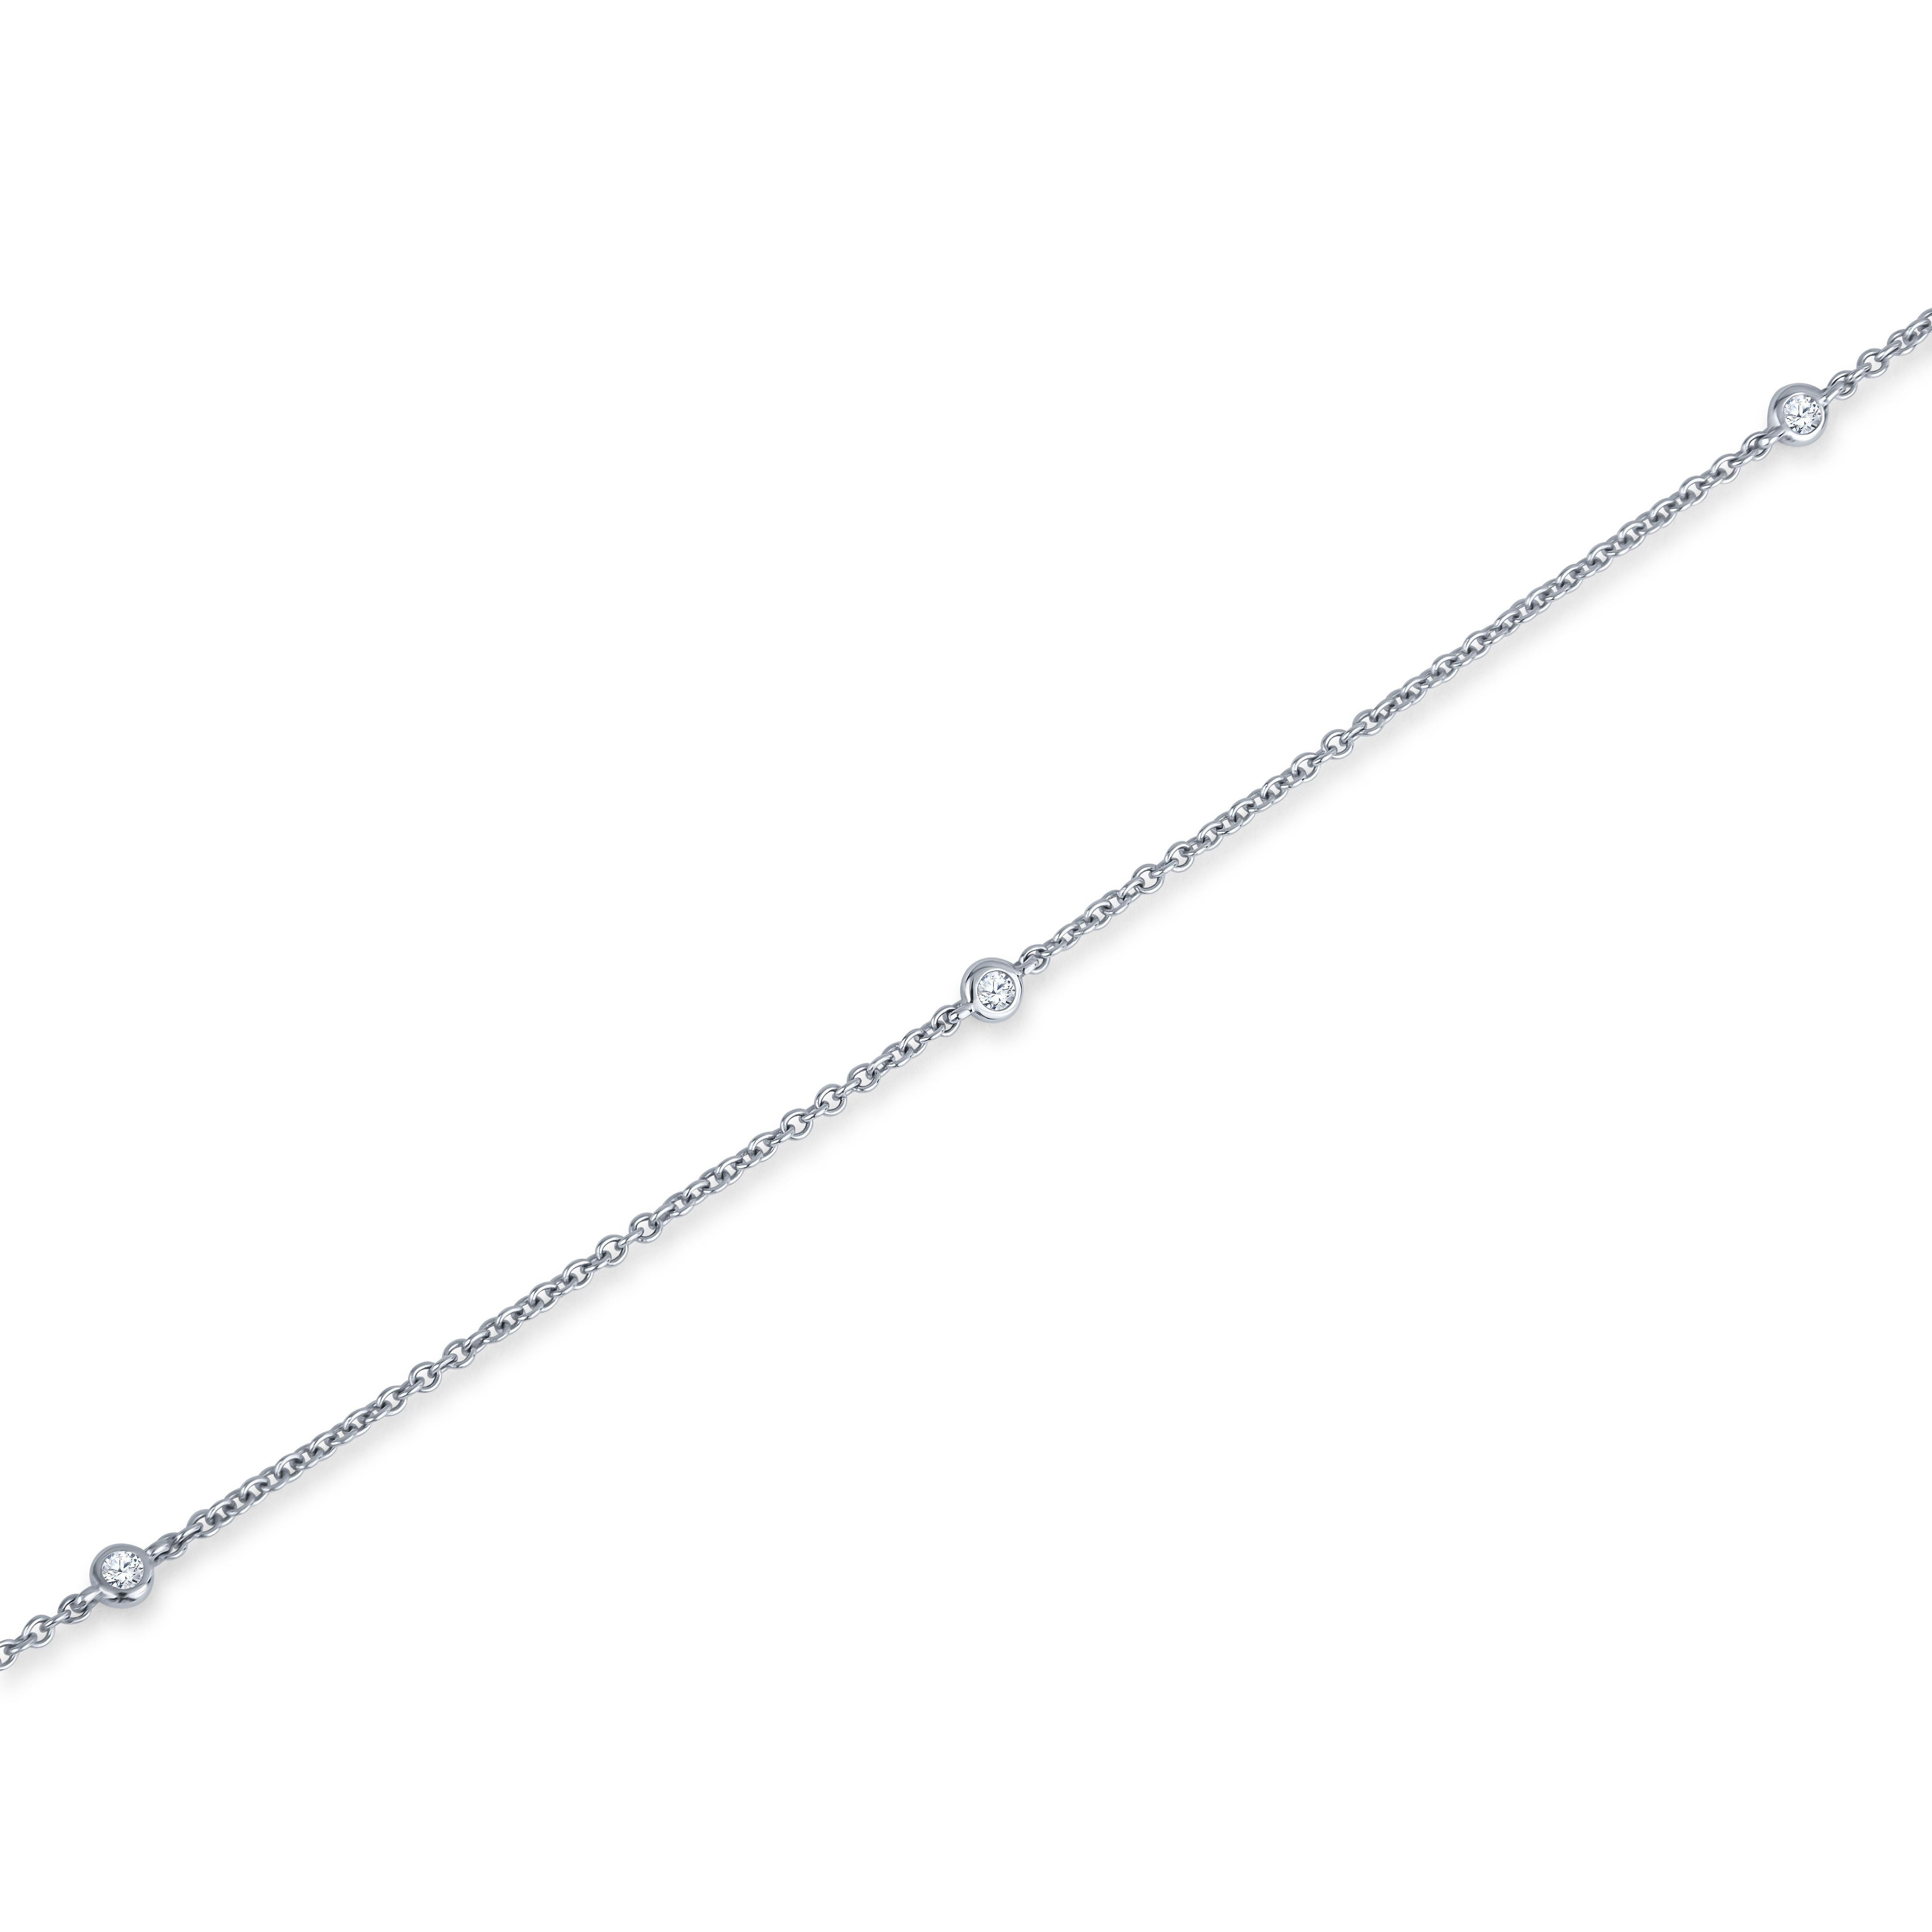 This station necklace is part of our Soft Glamour collection. It features six round diamonds with a a 0.10ctw. The chain is made is 18kt white gold and is 16.5 inches long. It is the ideal necklace to add casual elegance for everyday wear.